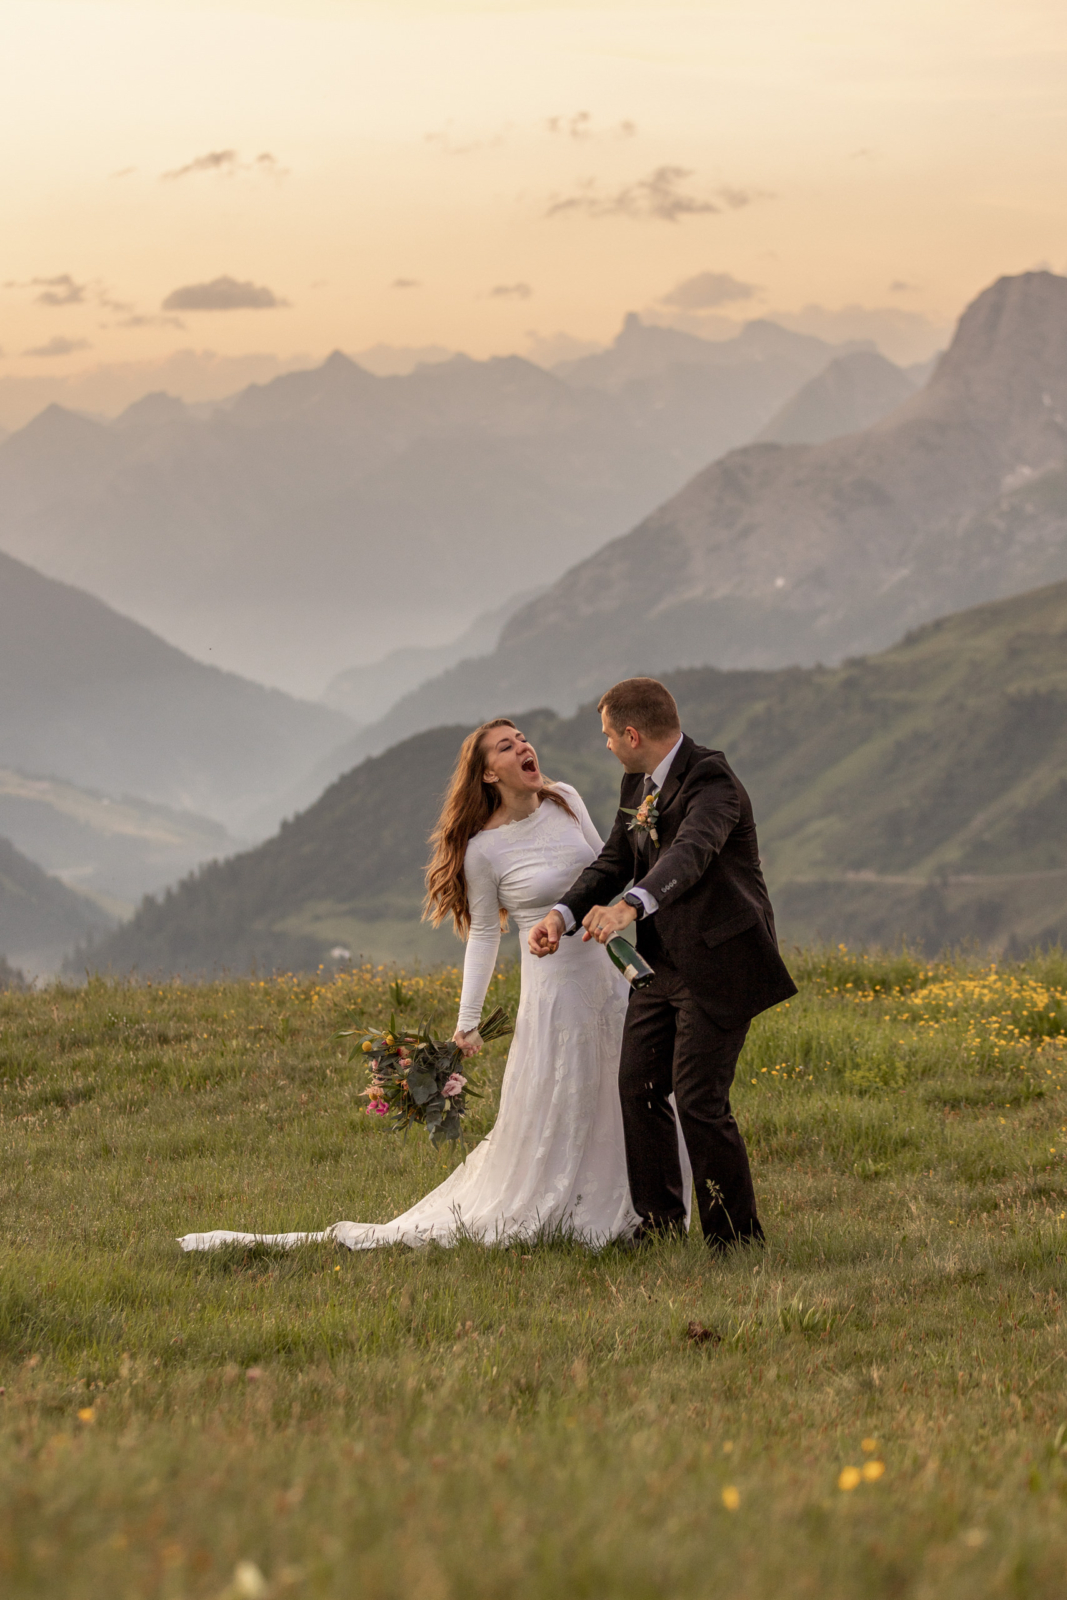 Elopement Wedding in the mountains in Europe